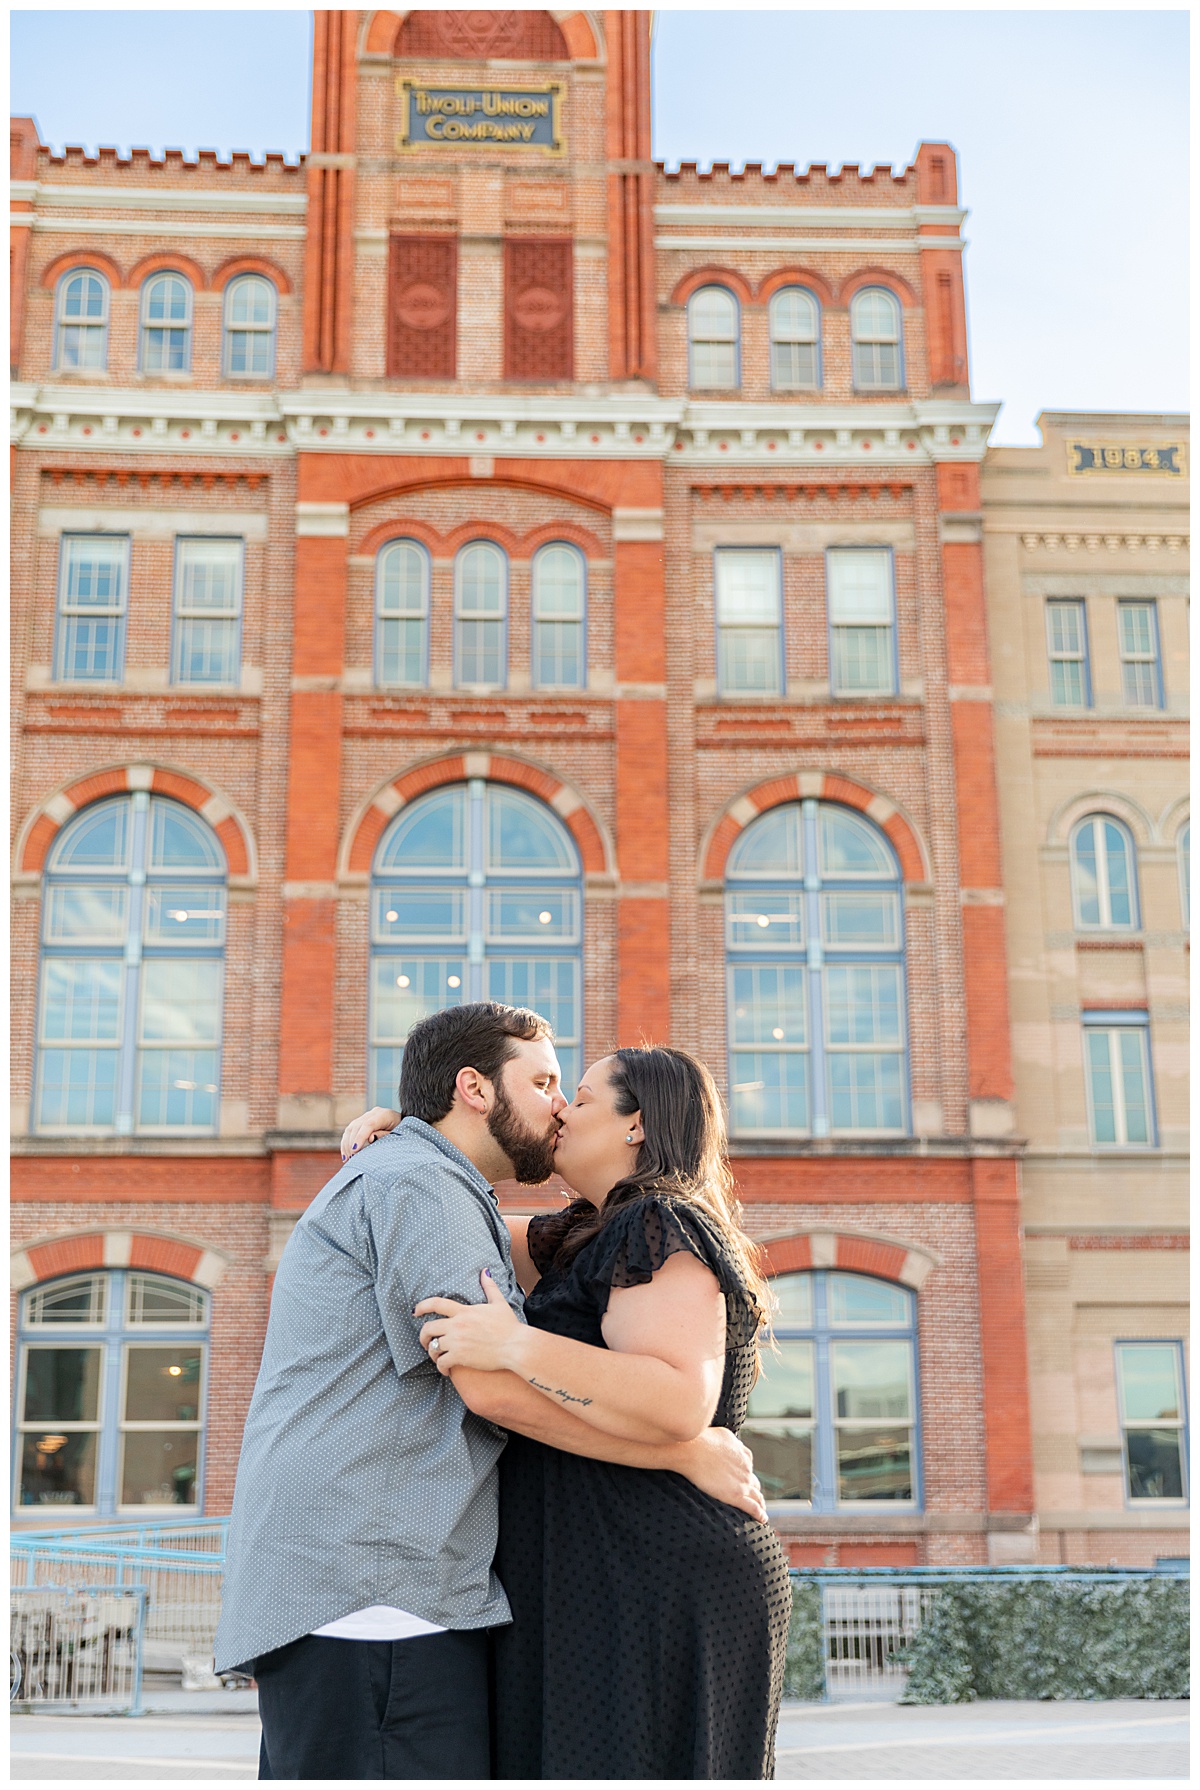 A couple in black and gray pose in front of a large red brick building for their Auraria Campus engagement session